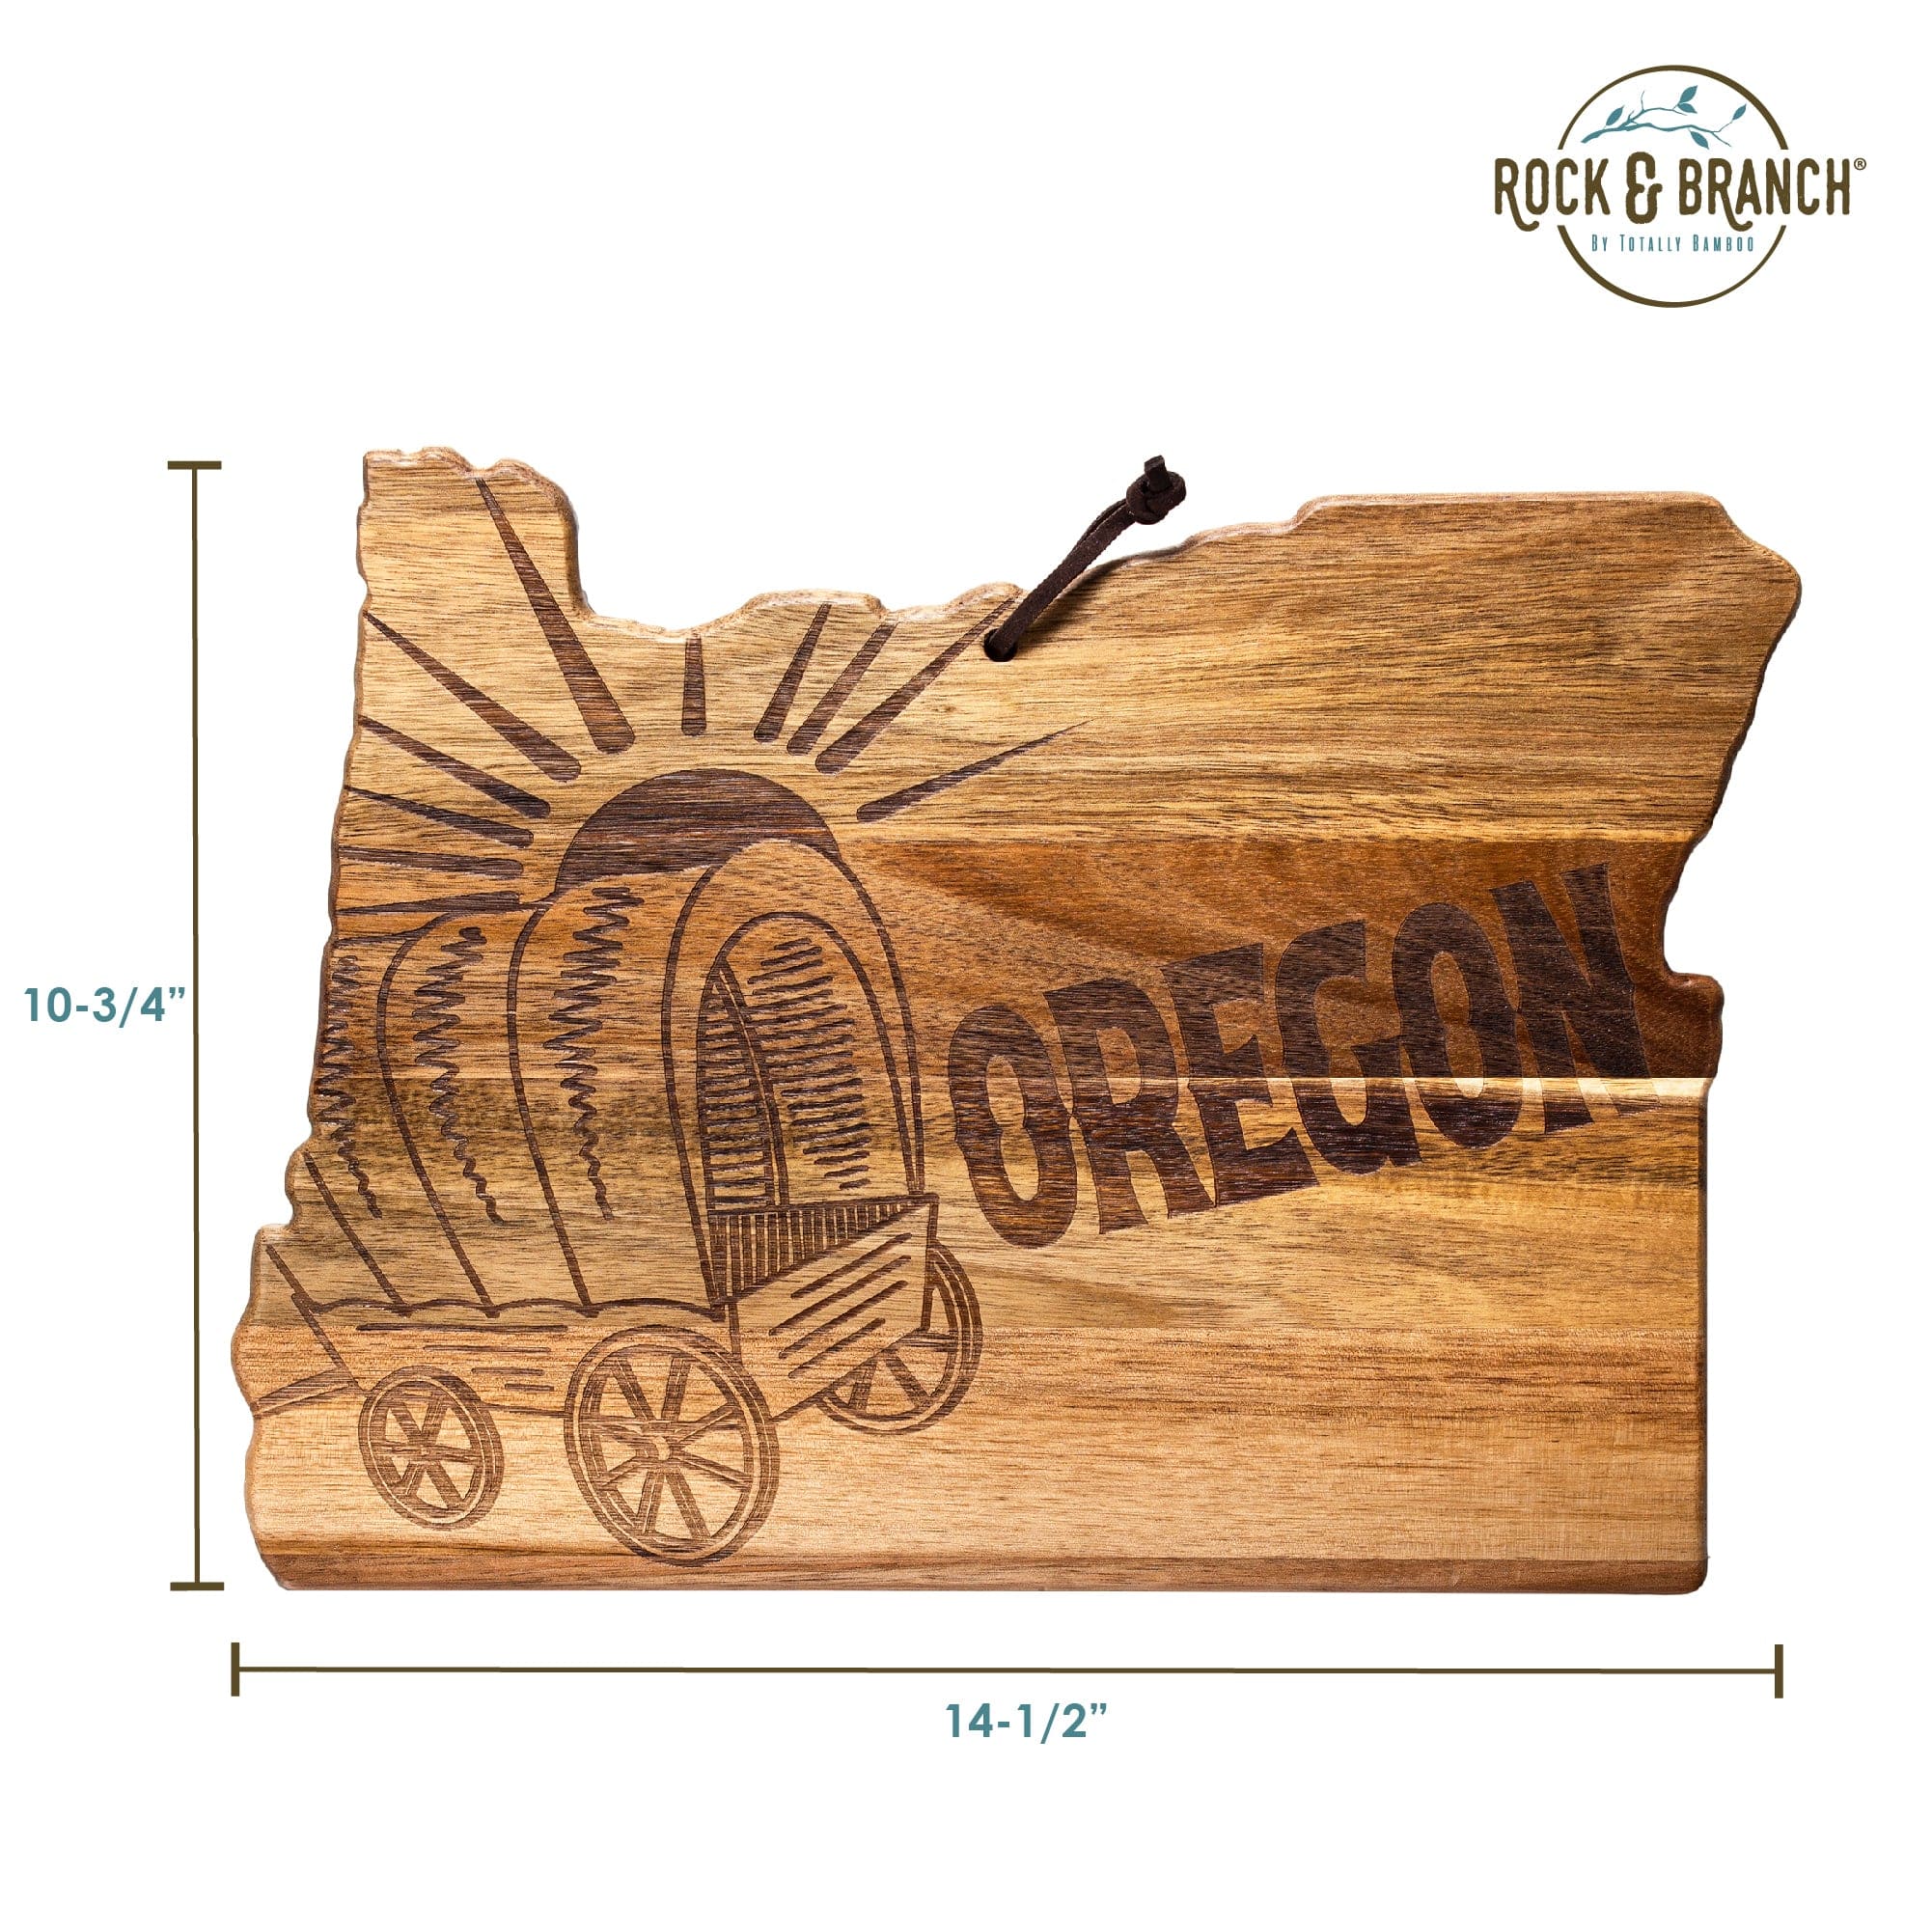 Totally Bamboo Rock and Branch® Origins Series Oregon State Shaped Cutting and Serving Board